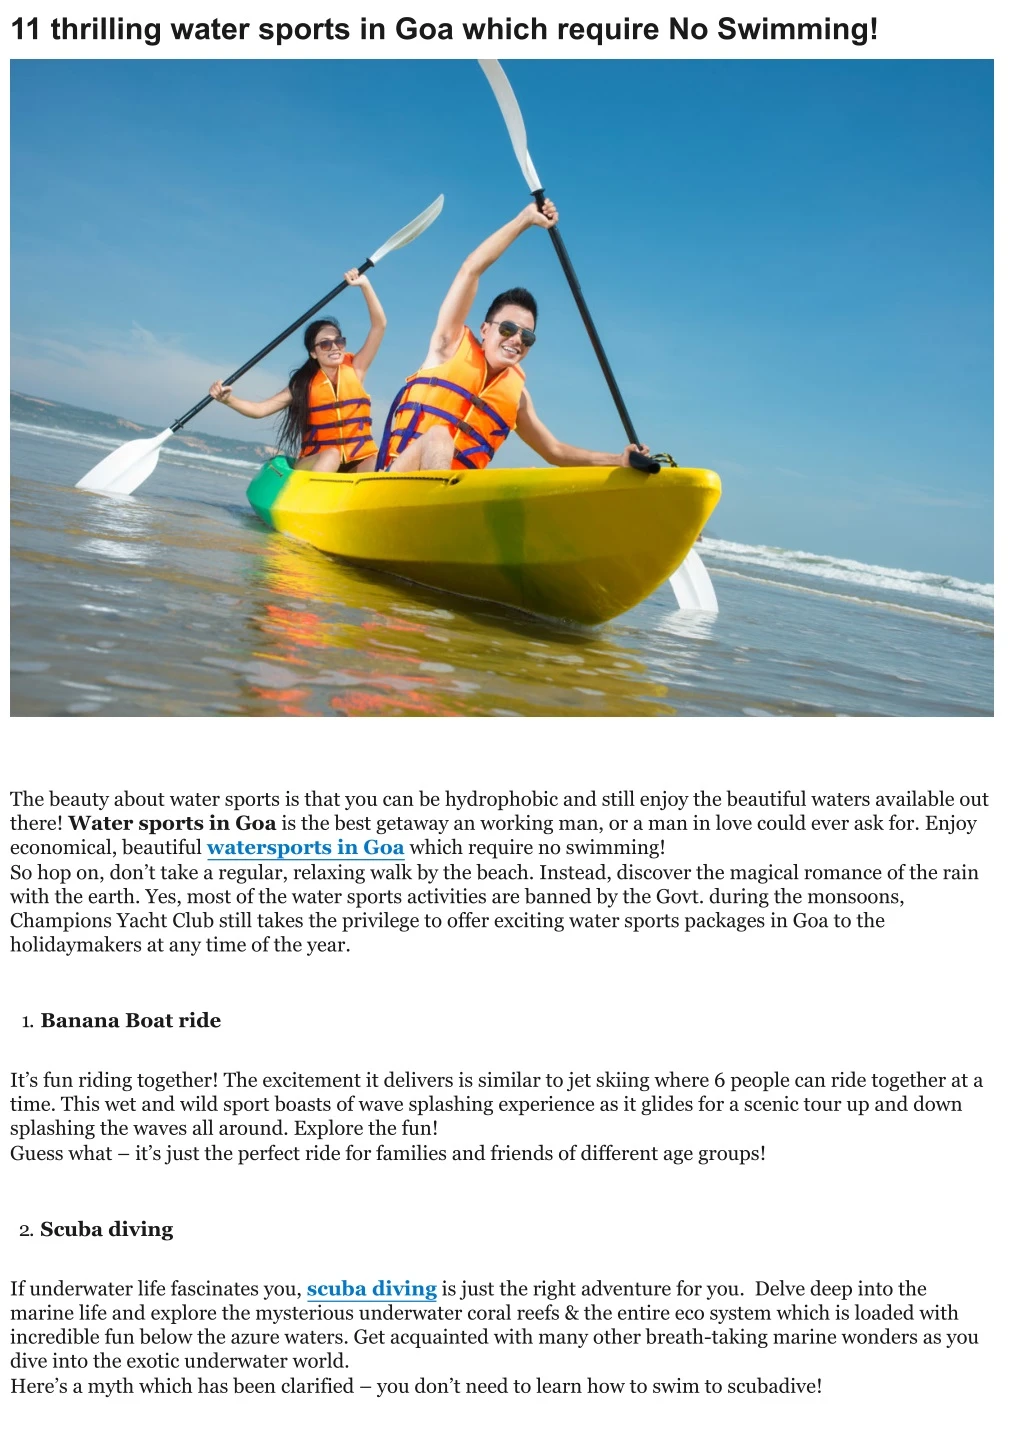 11 thrilling water sports in goa which require